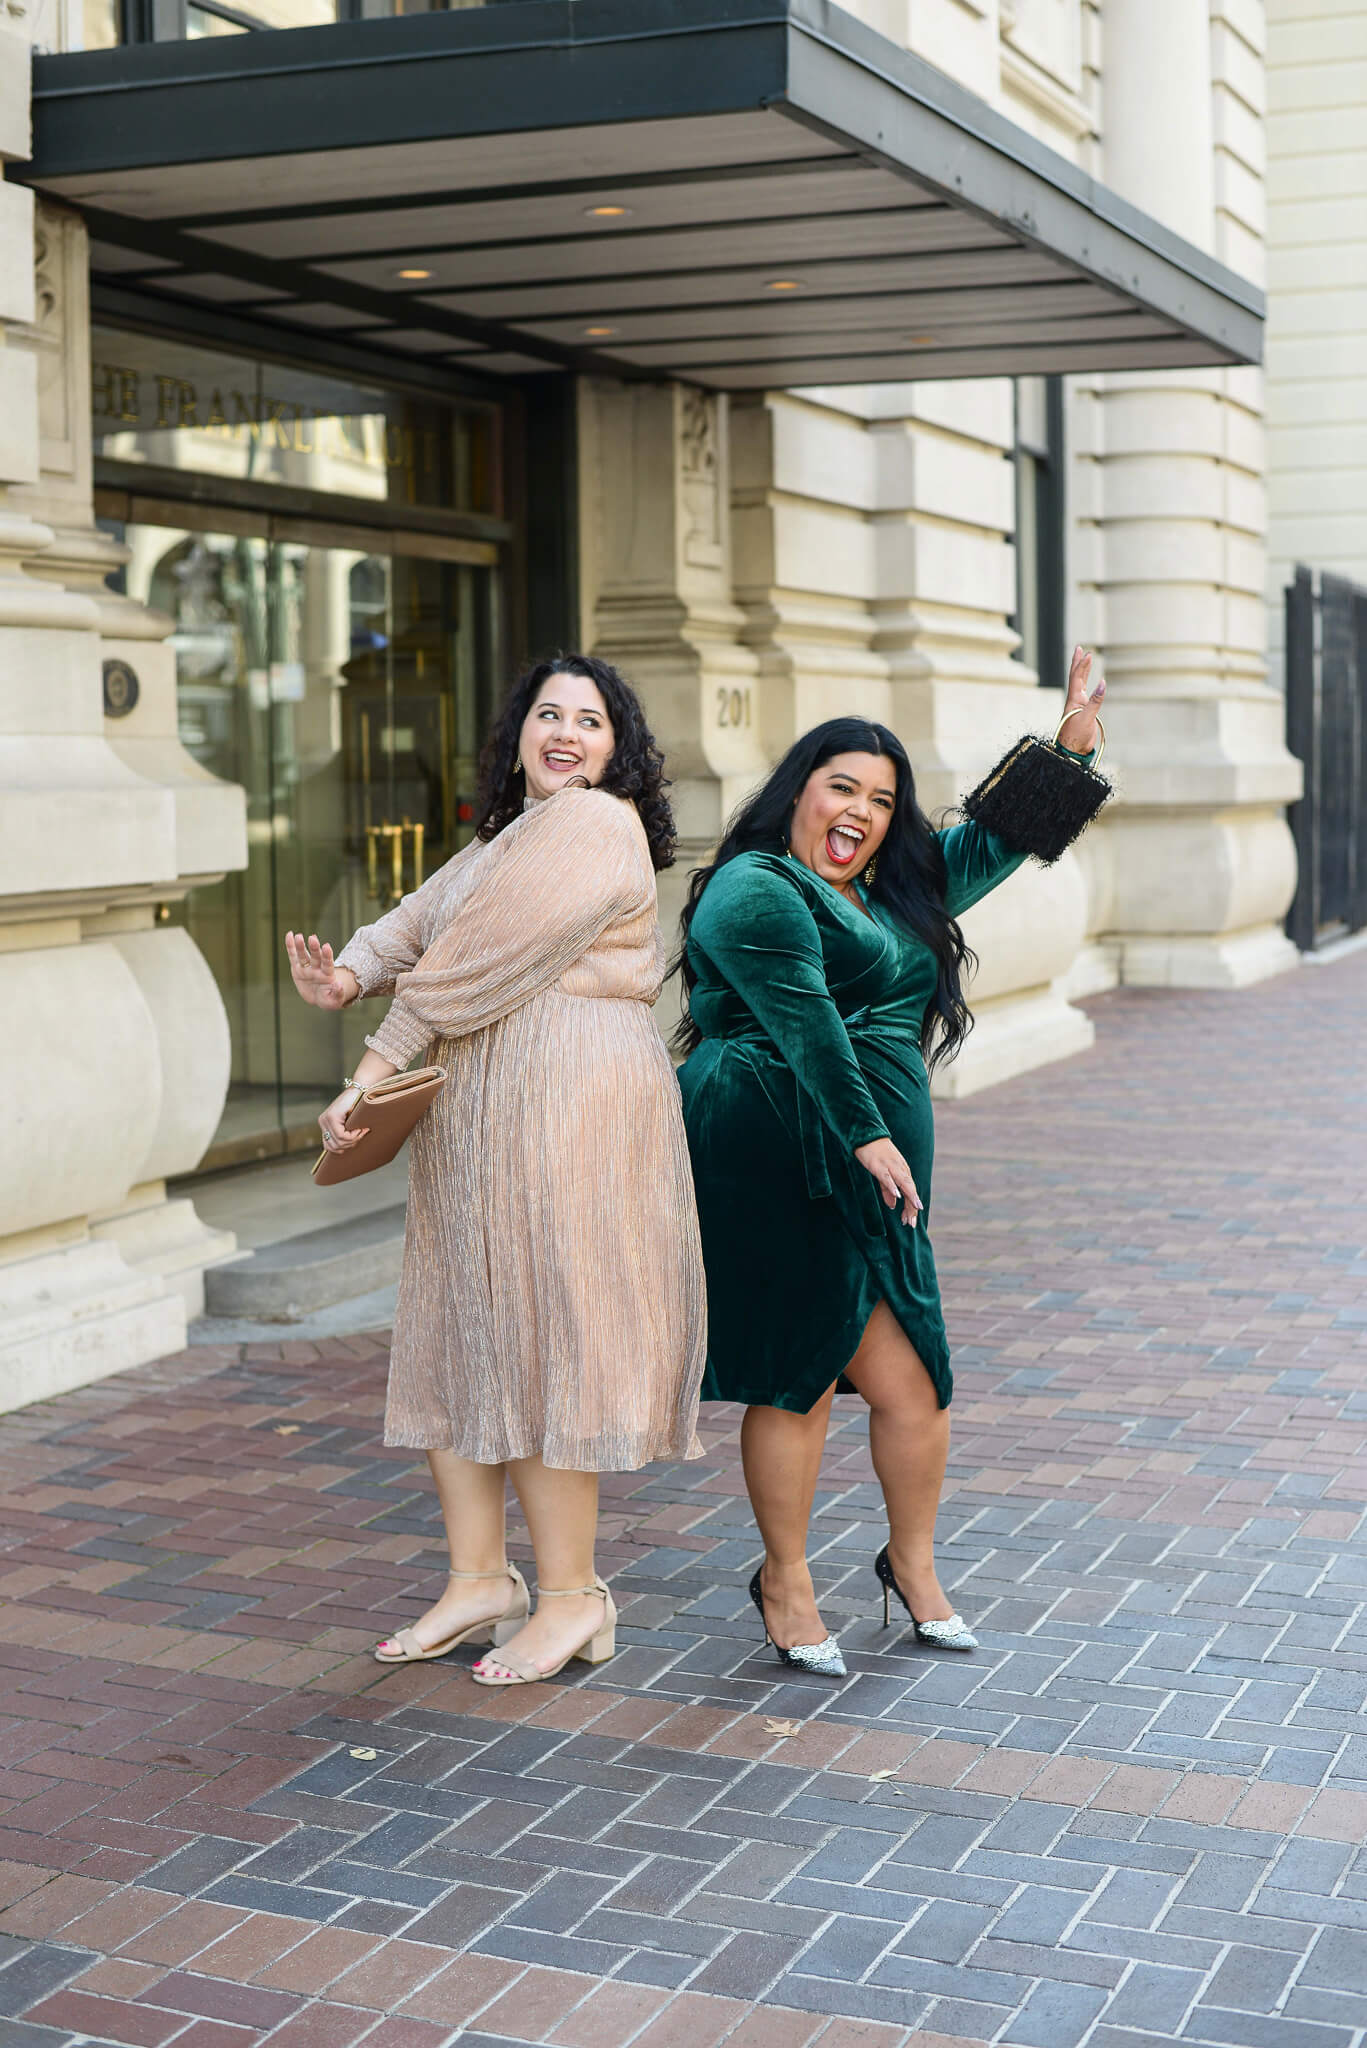 Bring on the champagne (plus size dress) for New Year's Eve